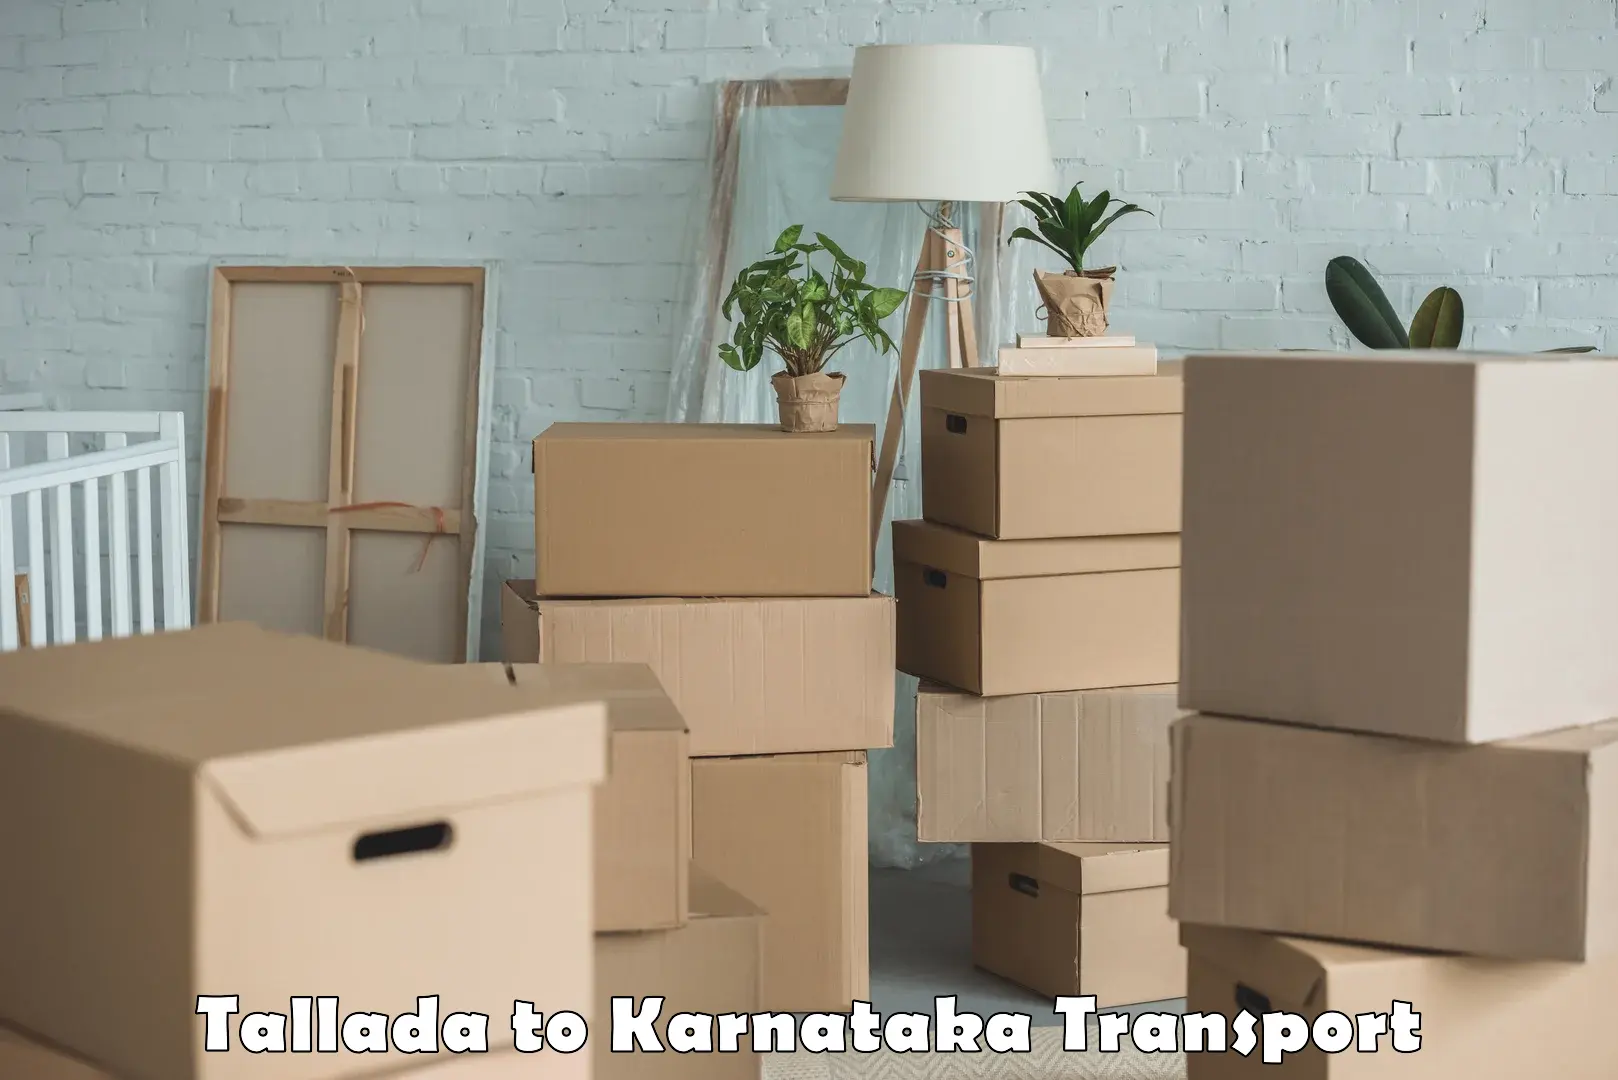 Best transport services in India Tallada to Kushtagi